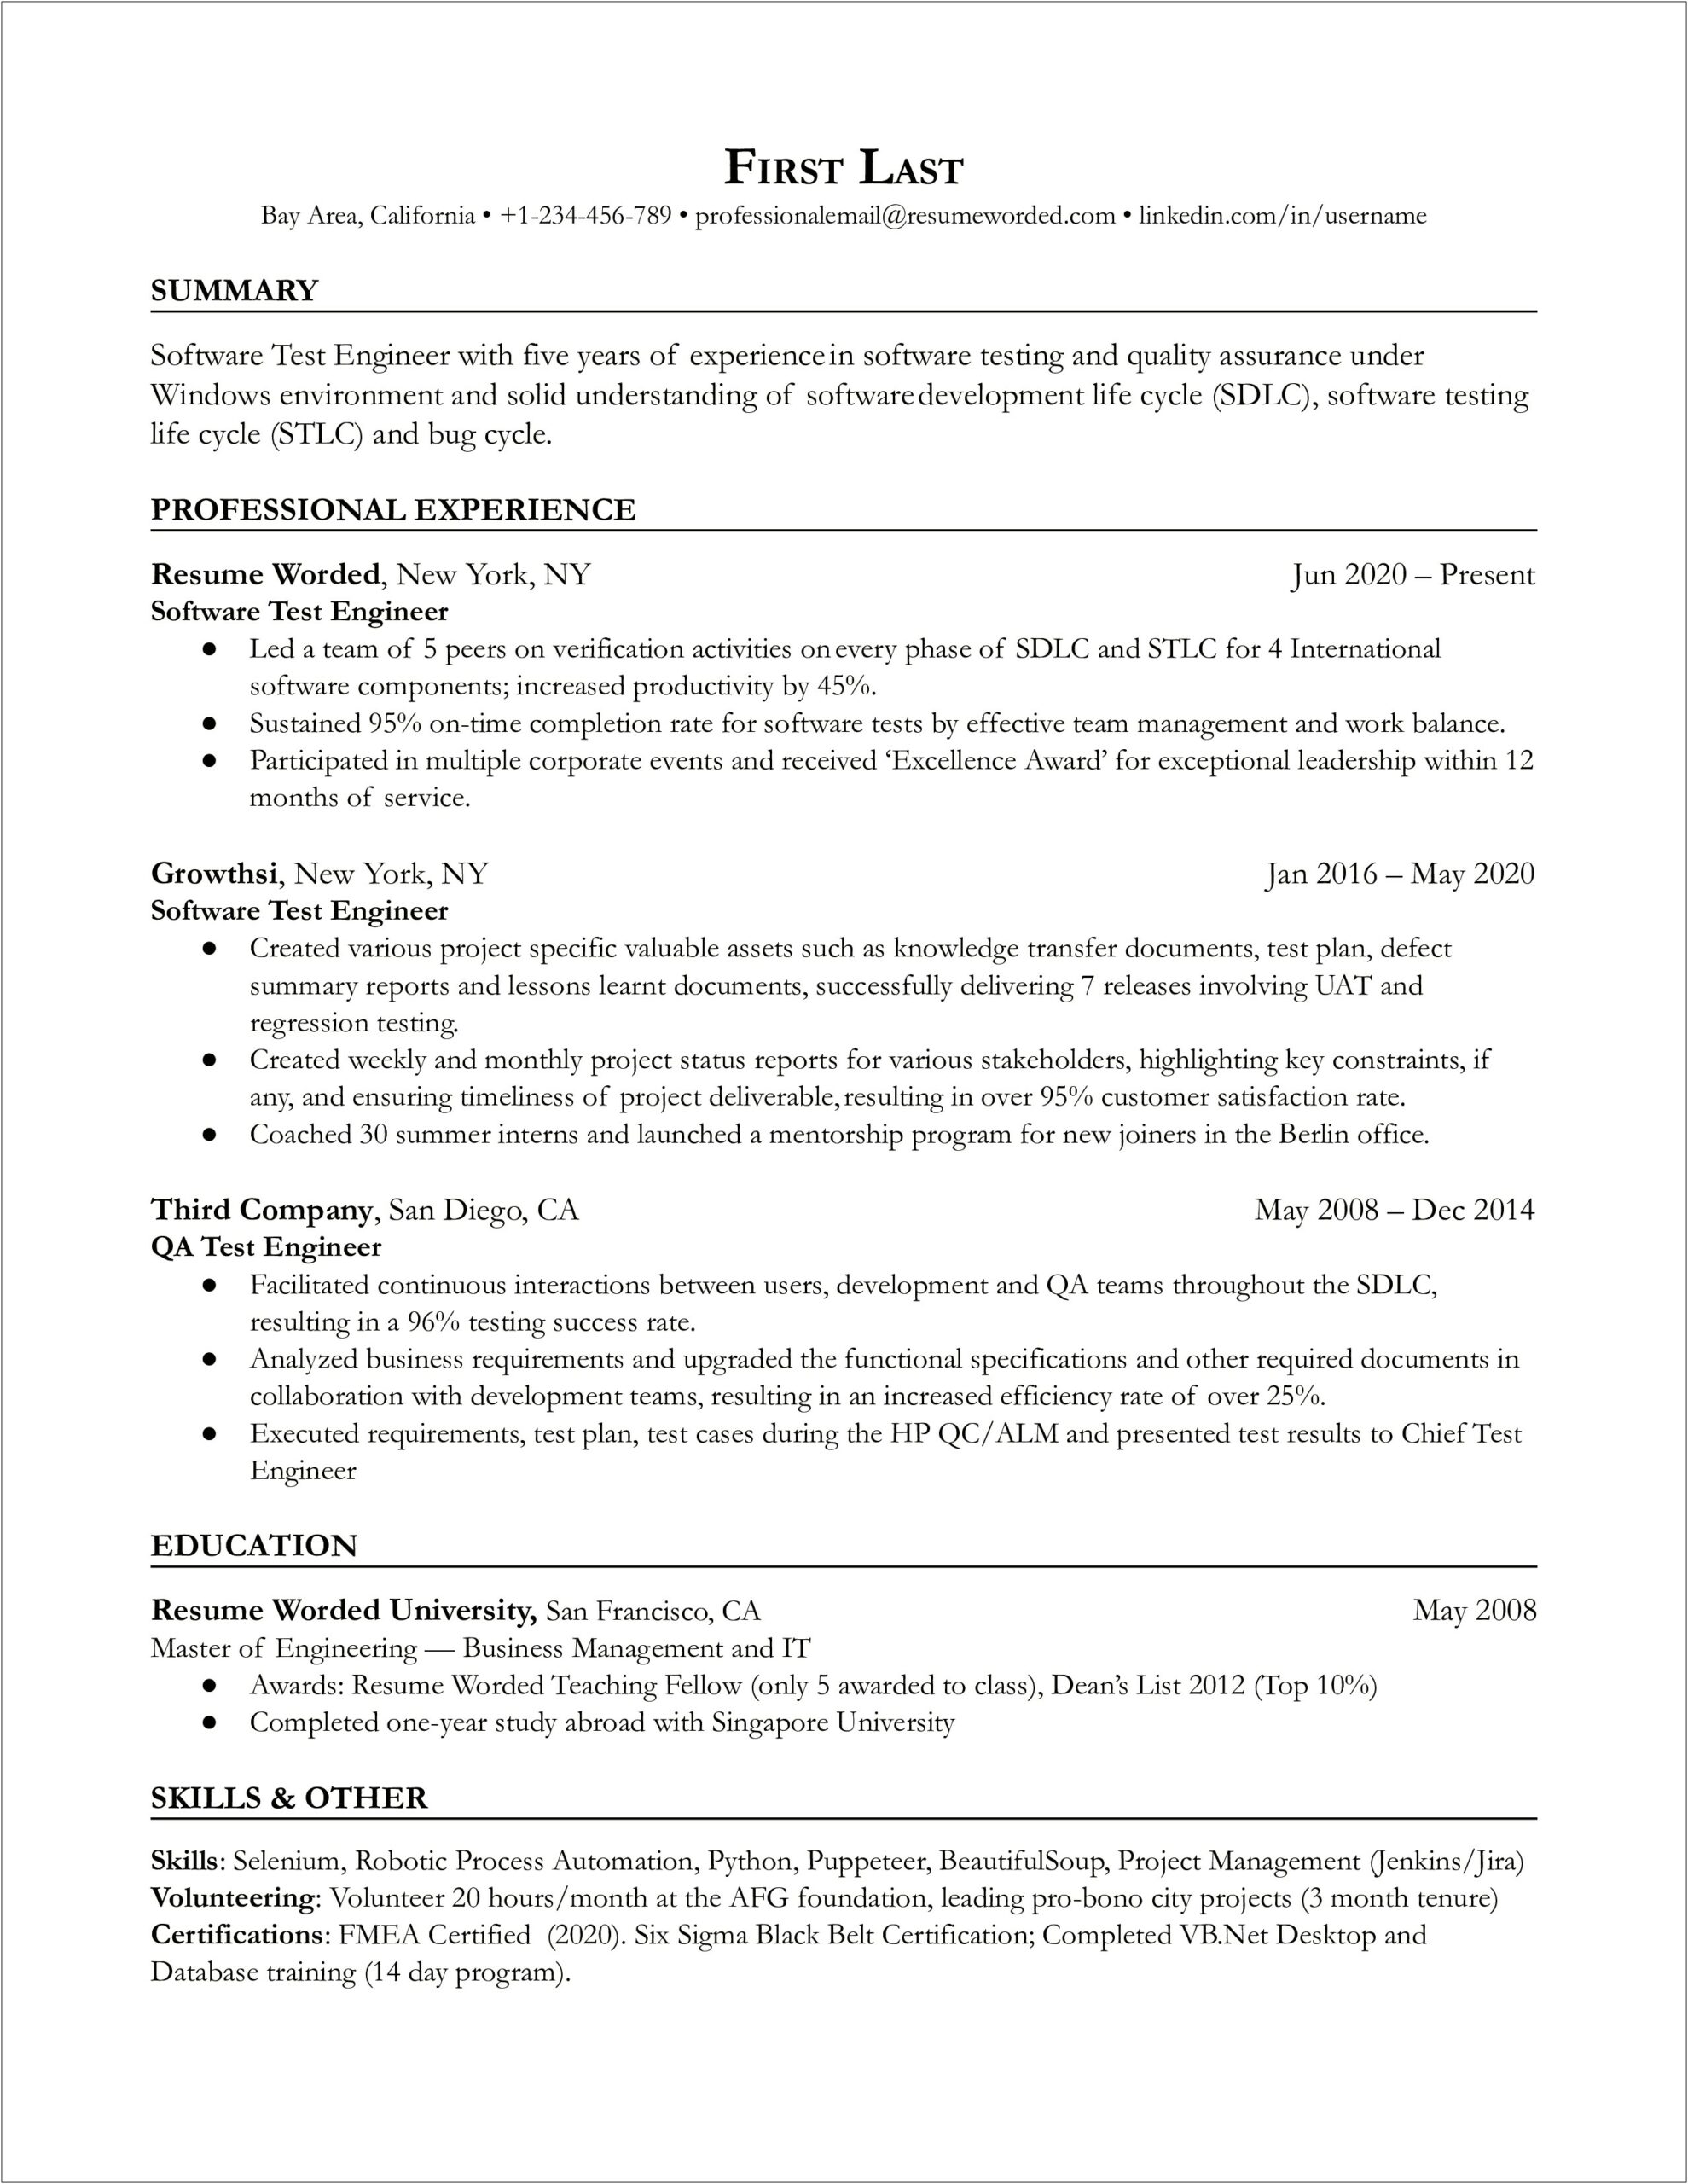 Testing Resume For 1 Year Experience